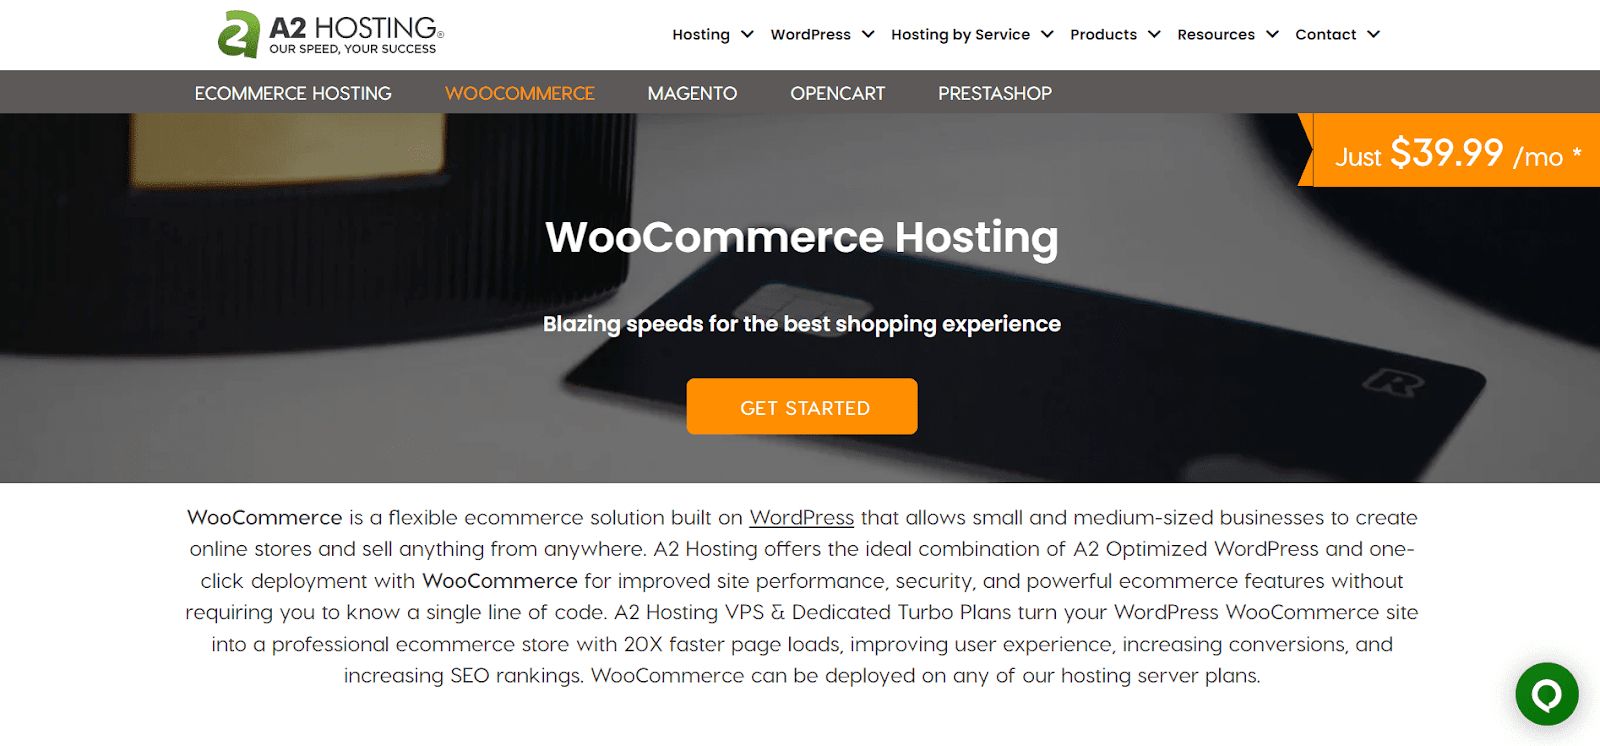 A2 Hosting made it to our list of the best WooCommerce hosting providers.